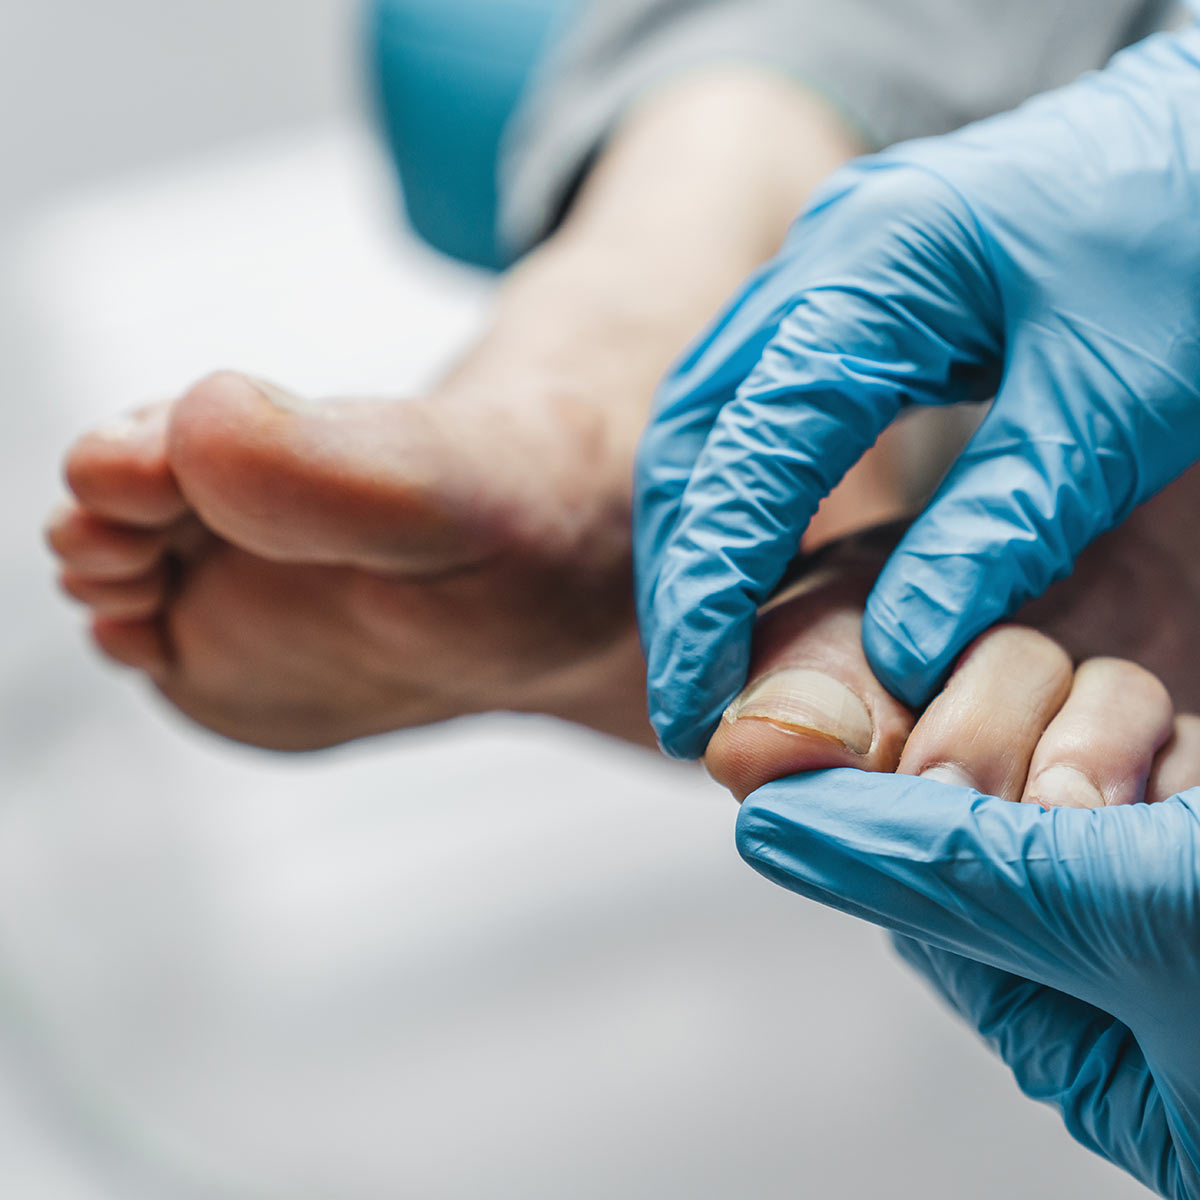 A nurse's gloved hands hold a foot to better examine the toenail.